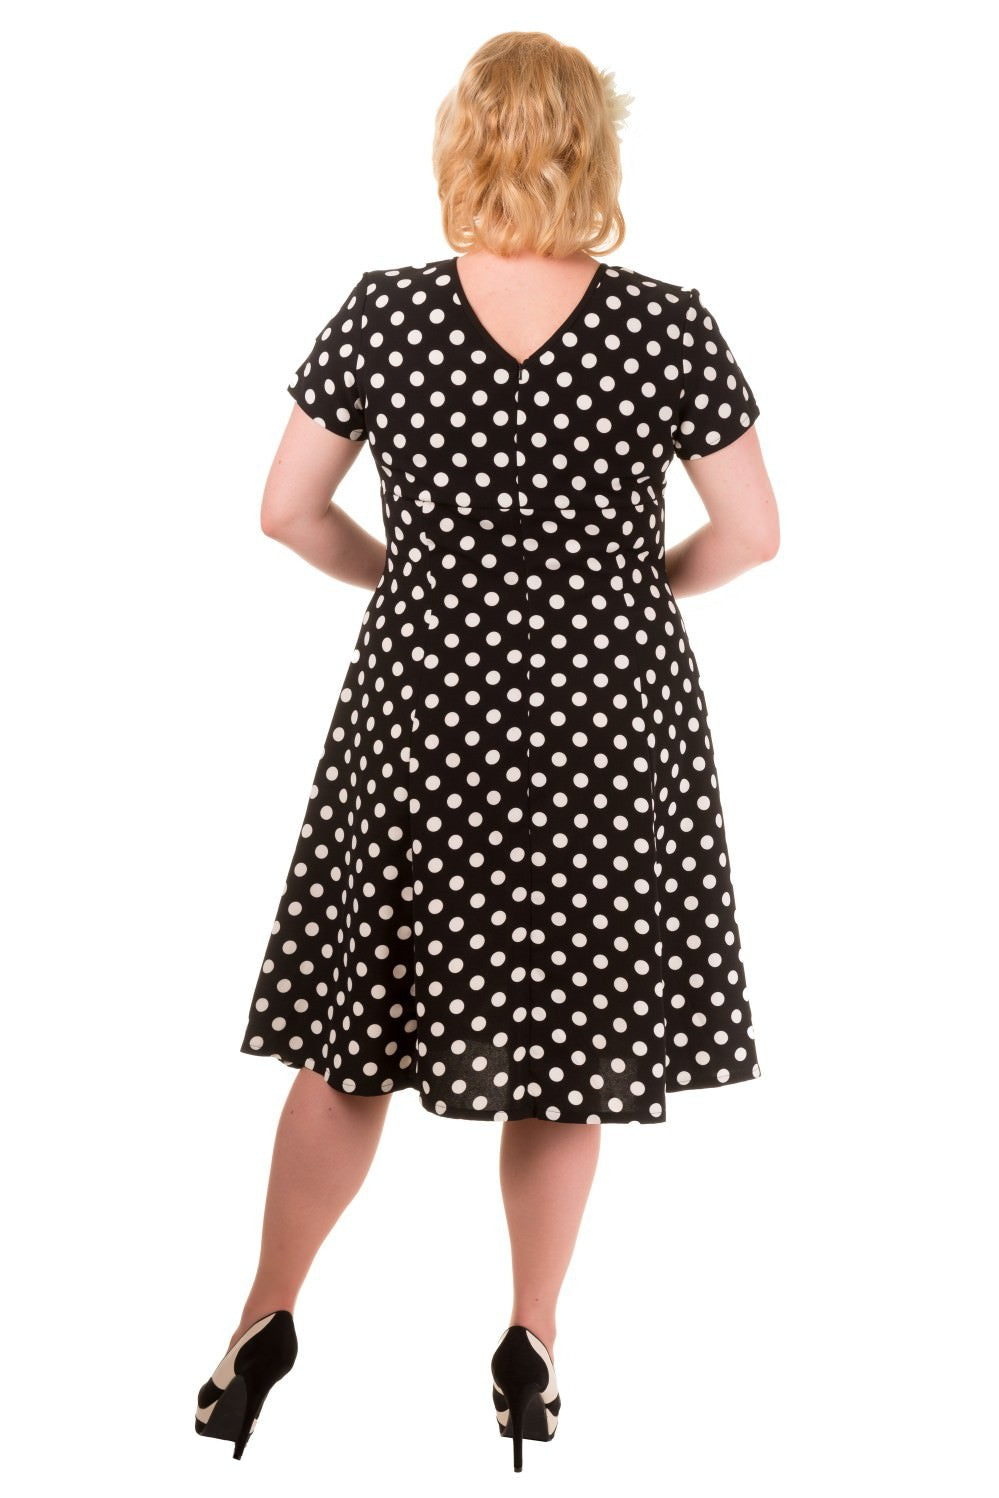 Vintage Style Polka Dot Short Sleeve Party Dress - SOLD OUT